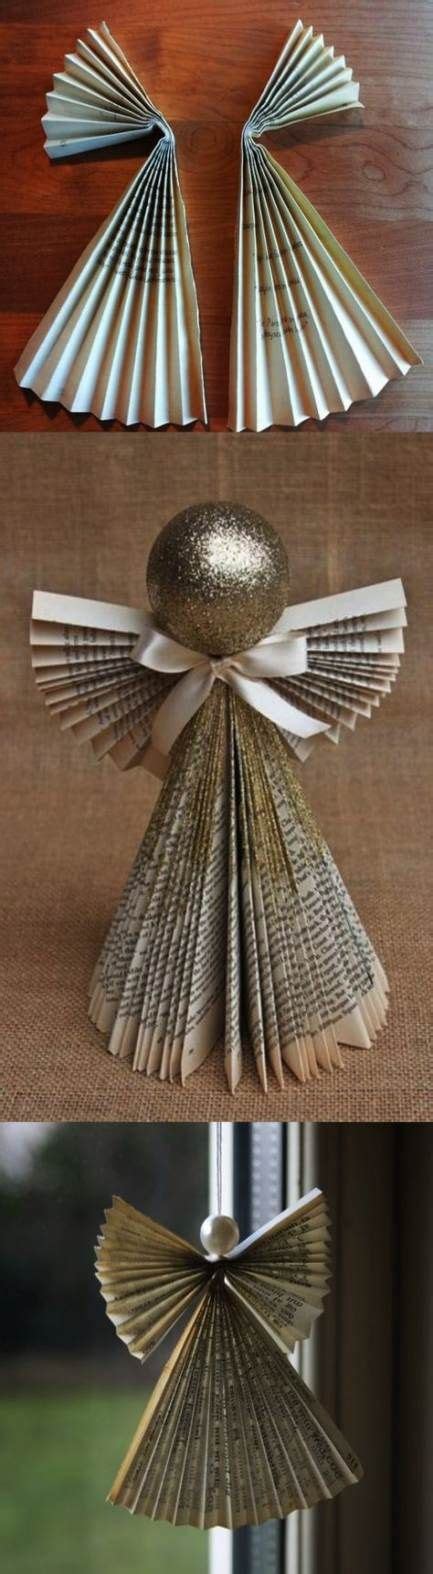 Find inspiration and instructions for home decor projects, flea market makeovers, outdoor living ideas, and more. Diy Christmas Decorations For Home Do It Yourself 68 Ideas | Christmas decor diy, Easy christmas ...